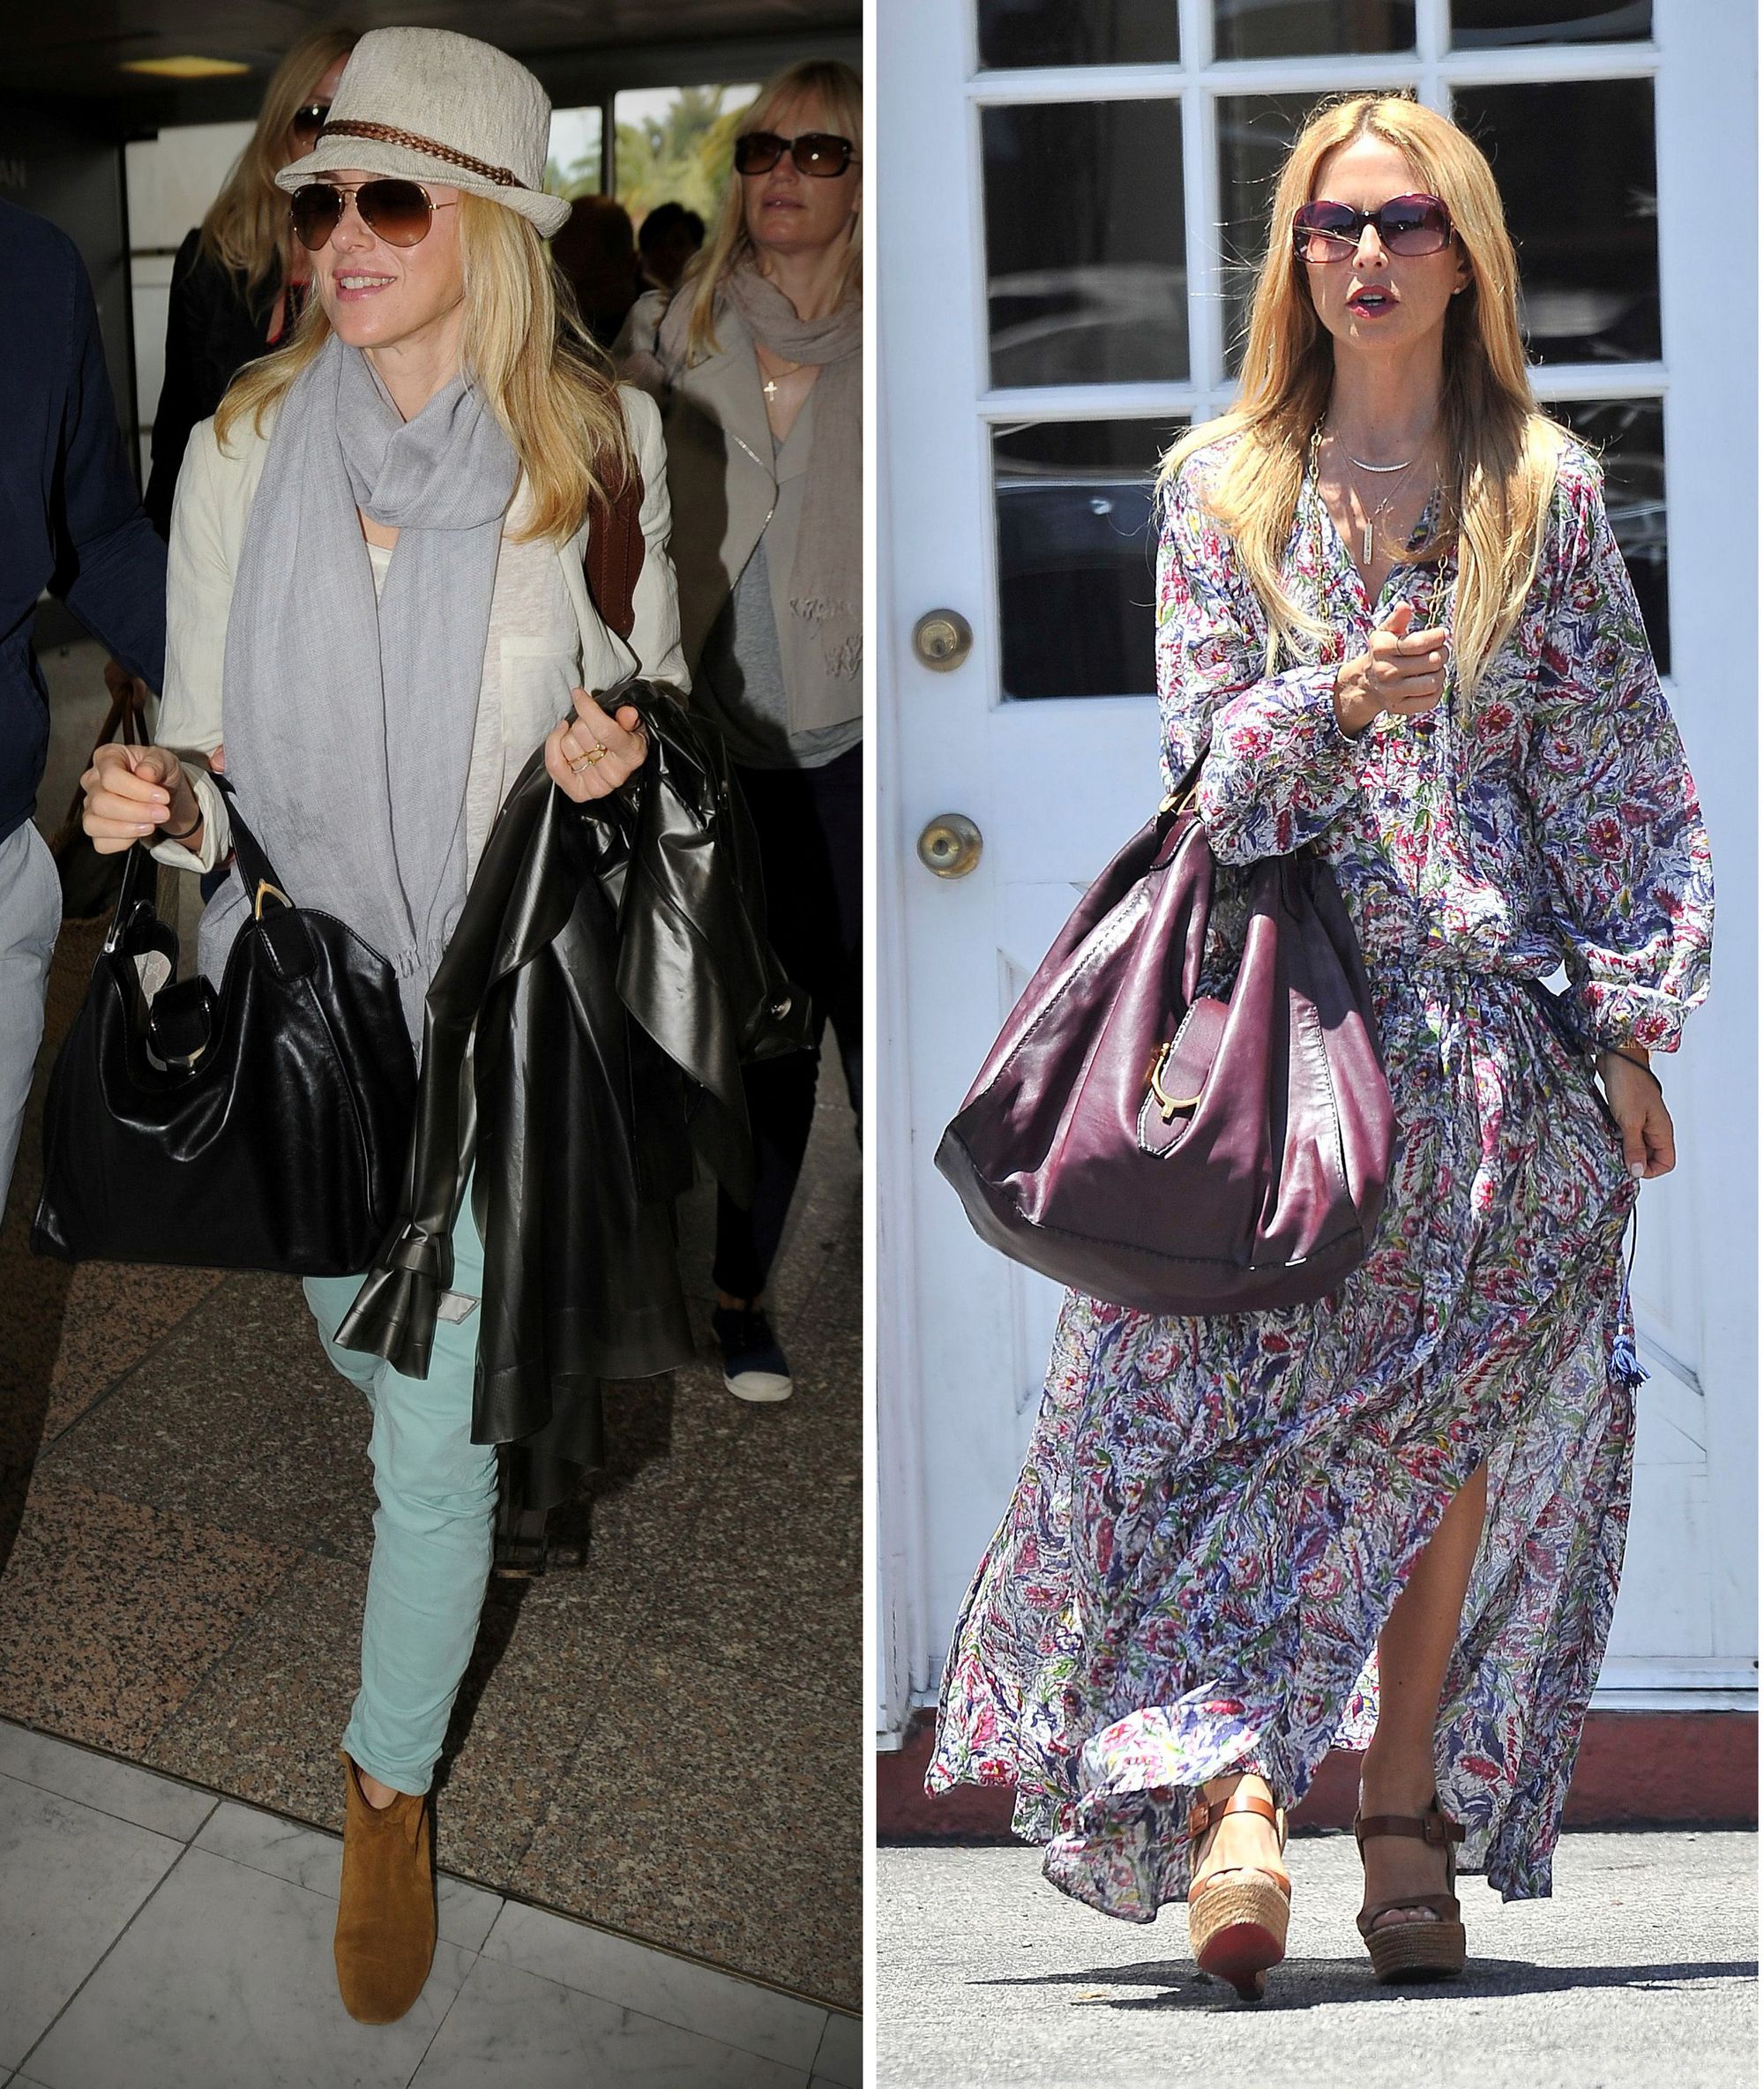 Naomi Watts & Rachel Zoe carrying the Gucci 'Soft Stirrup' bag (Photo courtesy | Gucci/Getty Images)